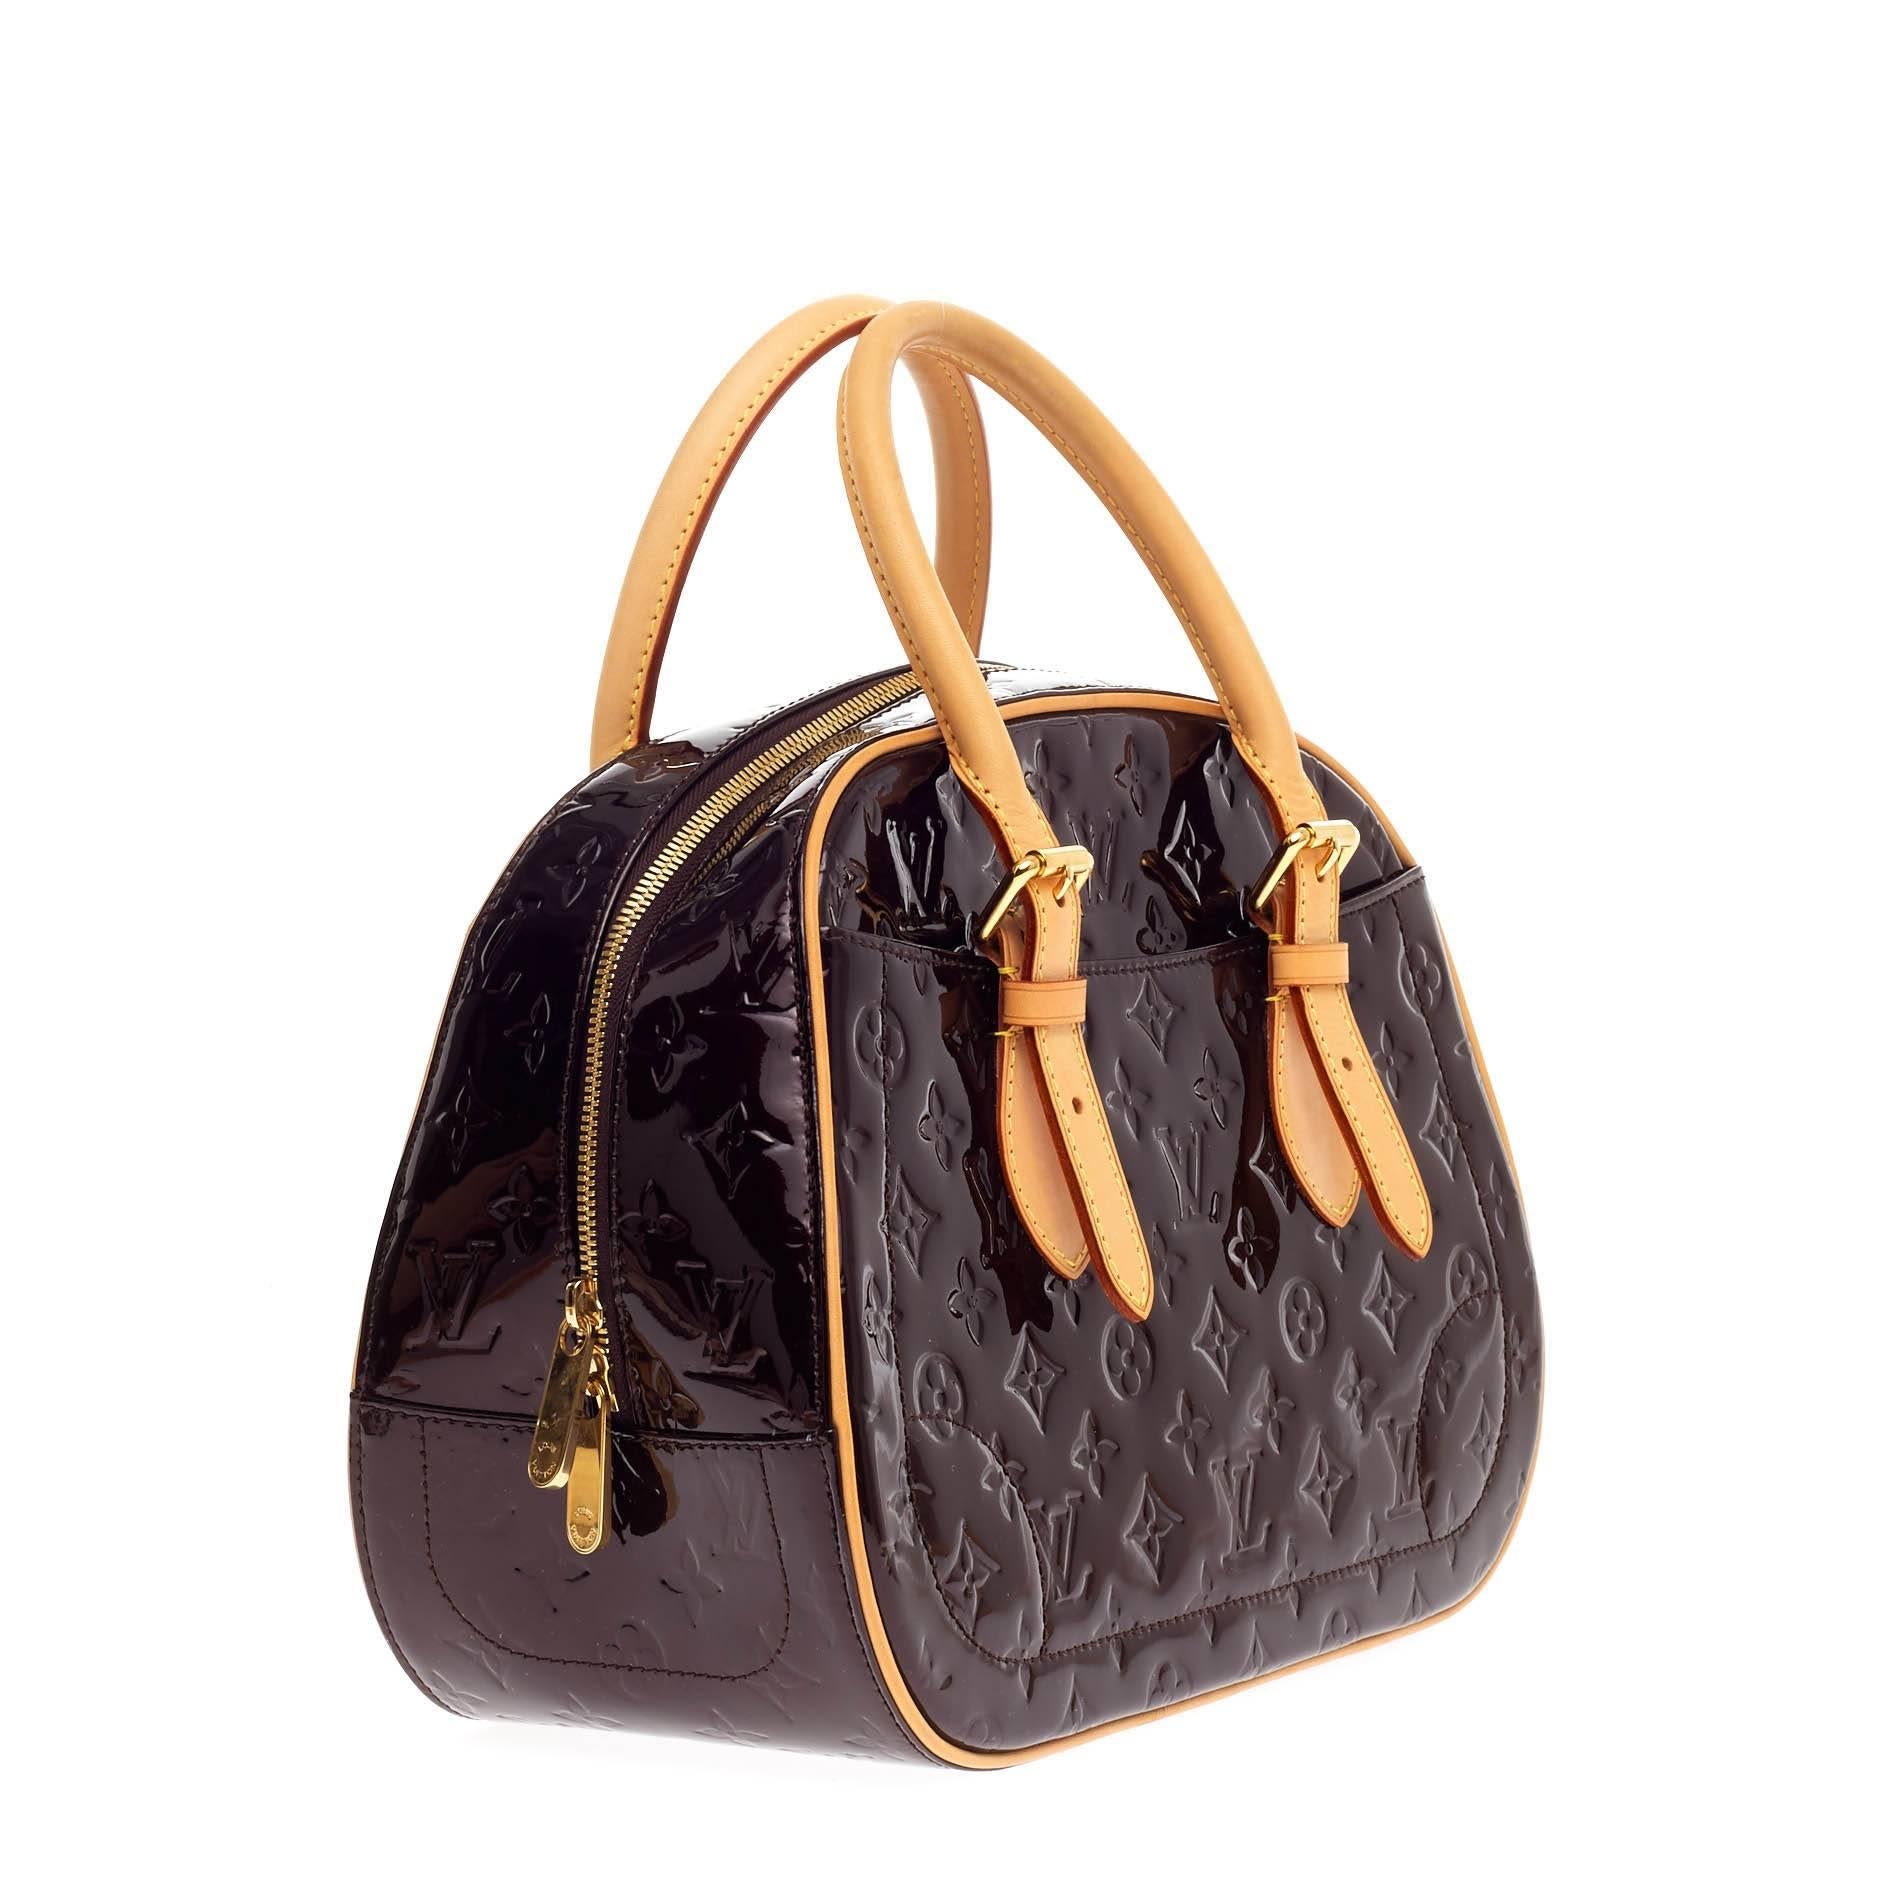 This authentic Louis Vuitton Summit Drive Monogram Vernis is perfect for on the go moments. Crafted in amarante vernis leather, this handbag features dual-flat vachetta leather handles, vachetta leather trims, exterior pockets and gold-tone hardware